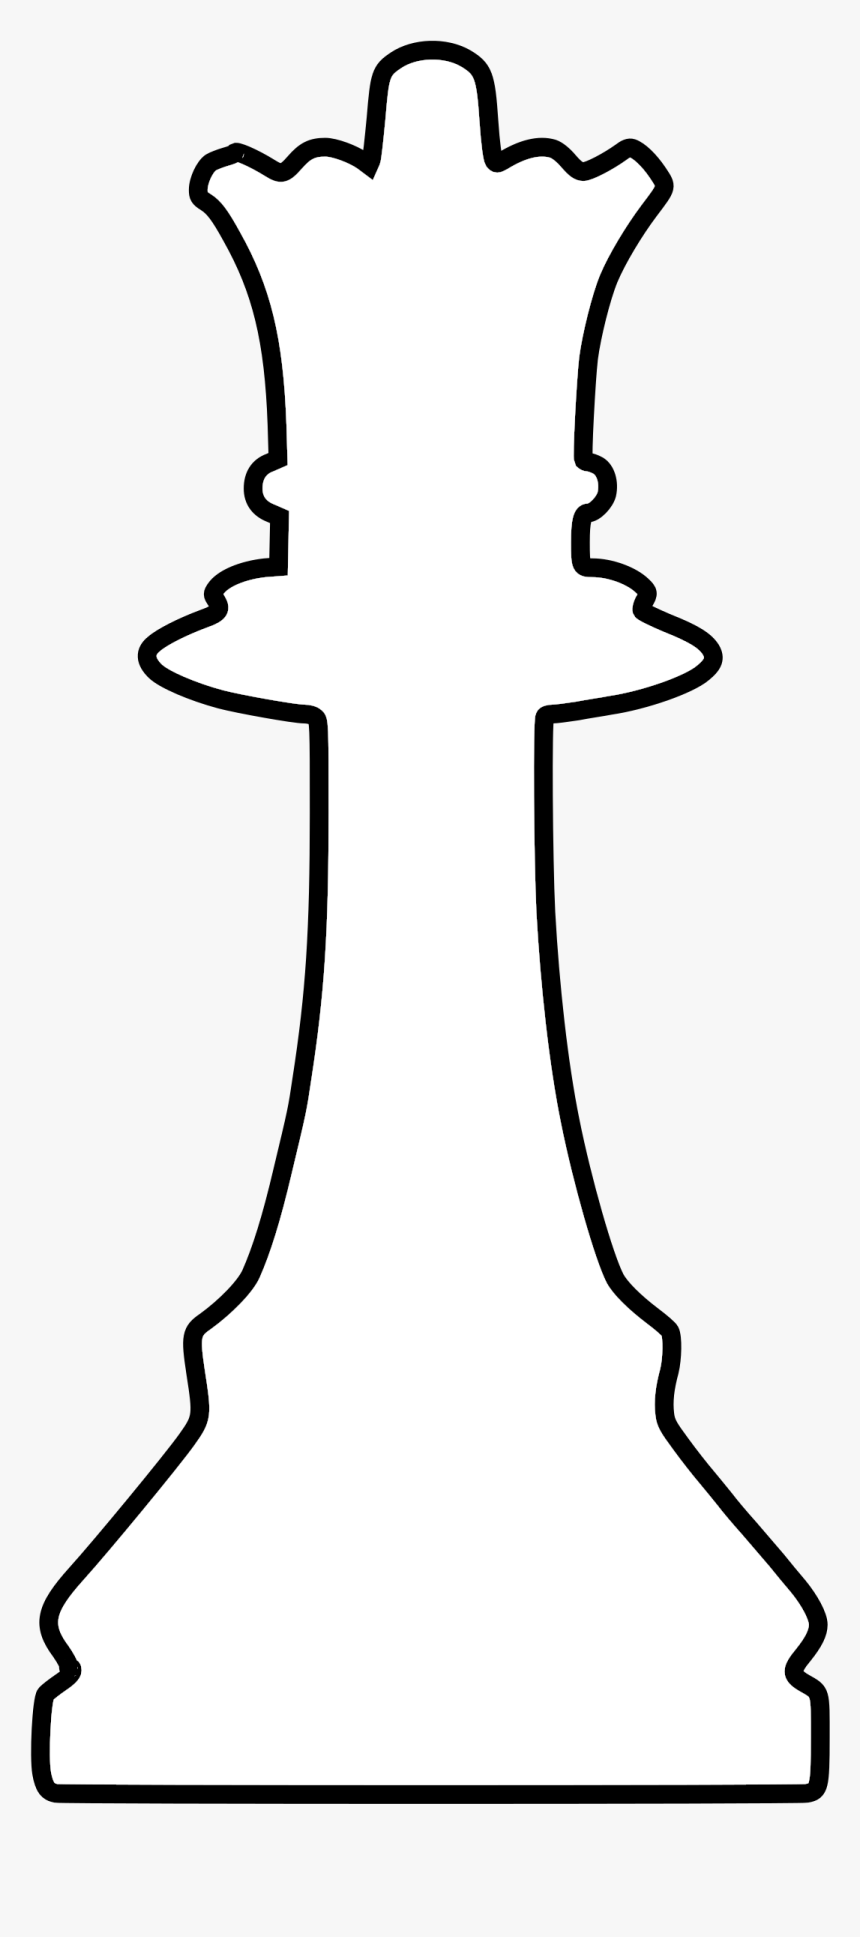 White Silhouette Remix Dama - King Chess Piece Silhouette, HD Png Download, Free Download